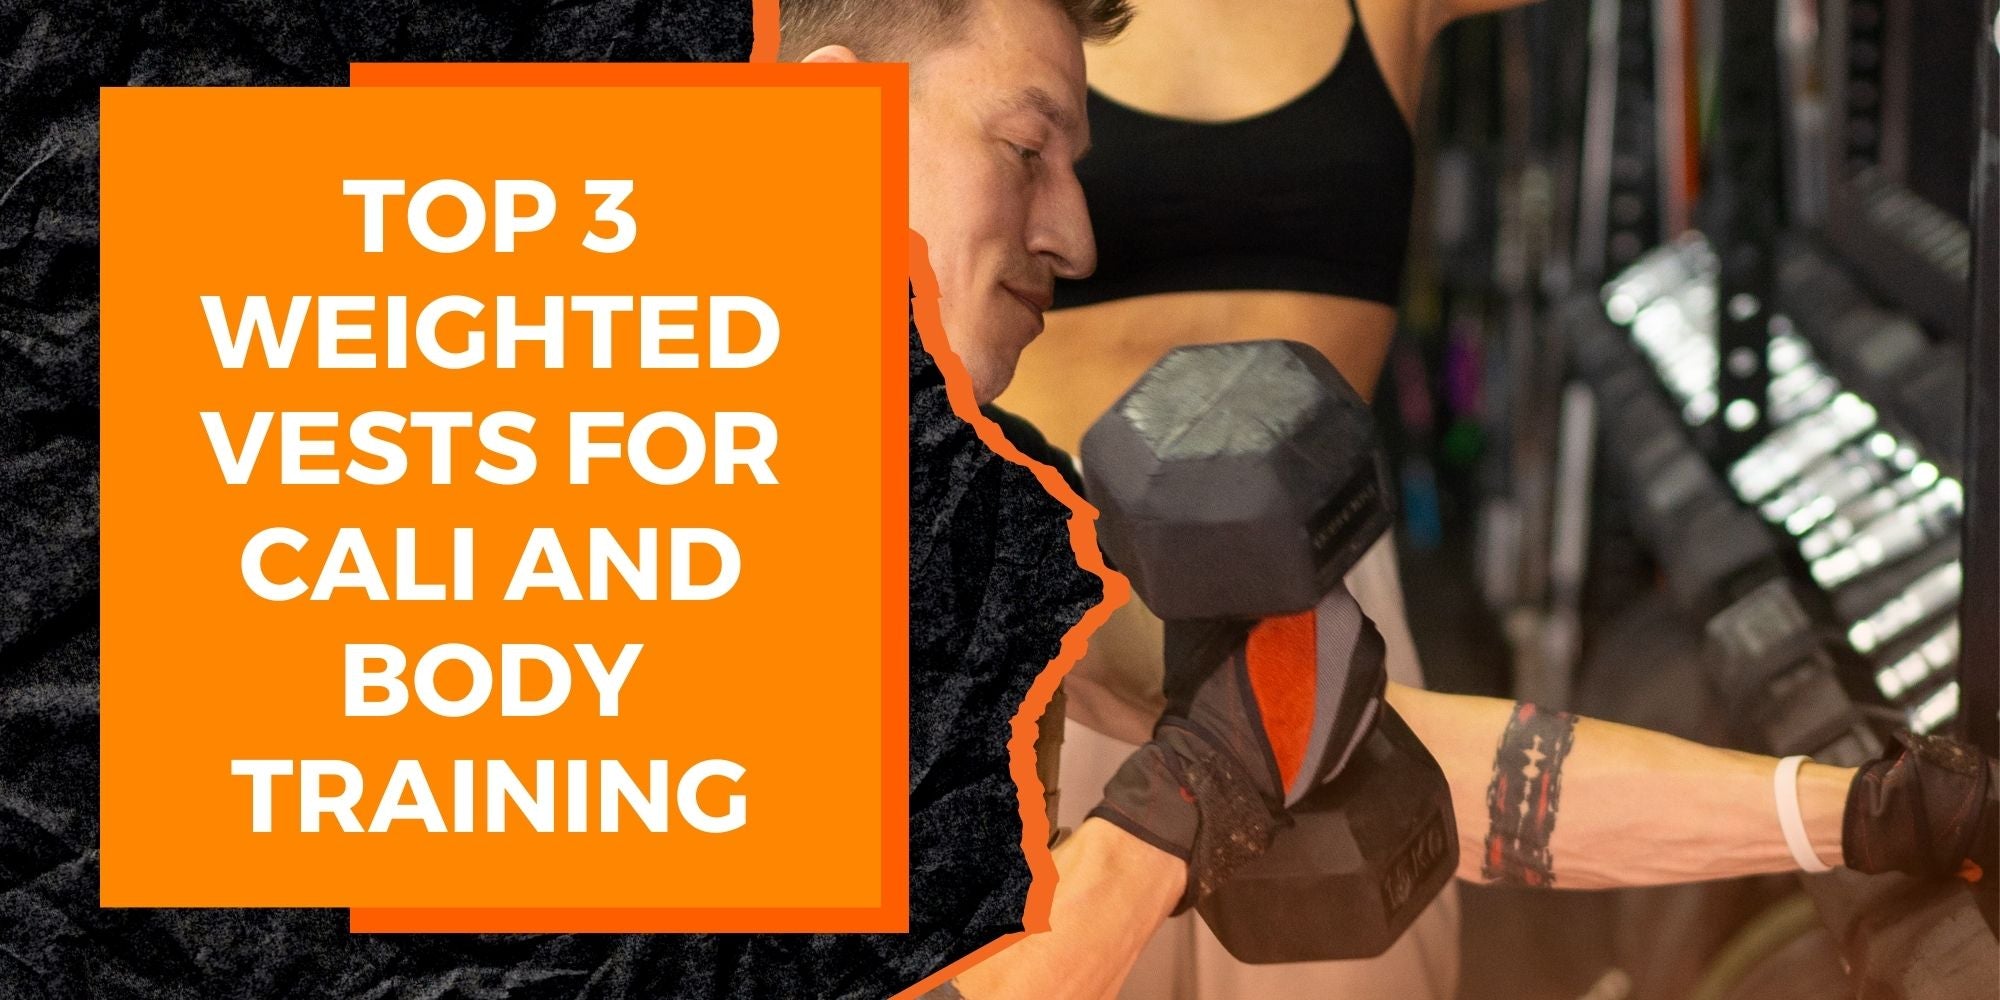 Top 3 Weighted Vests for Calisthenics and Bodyweight Training